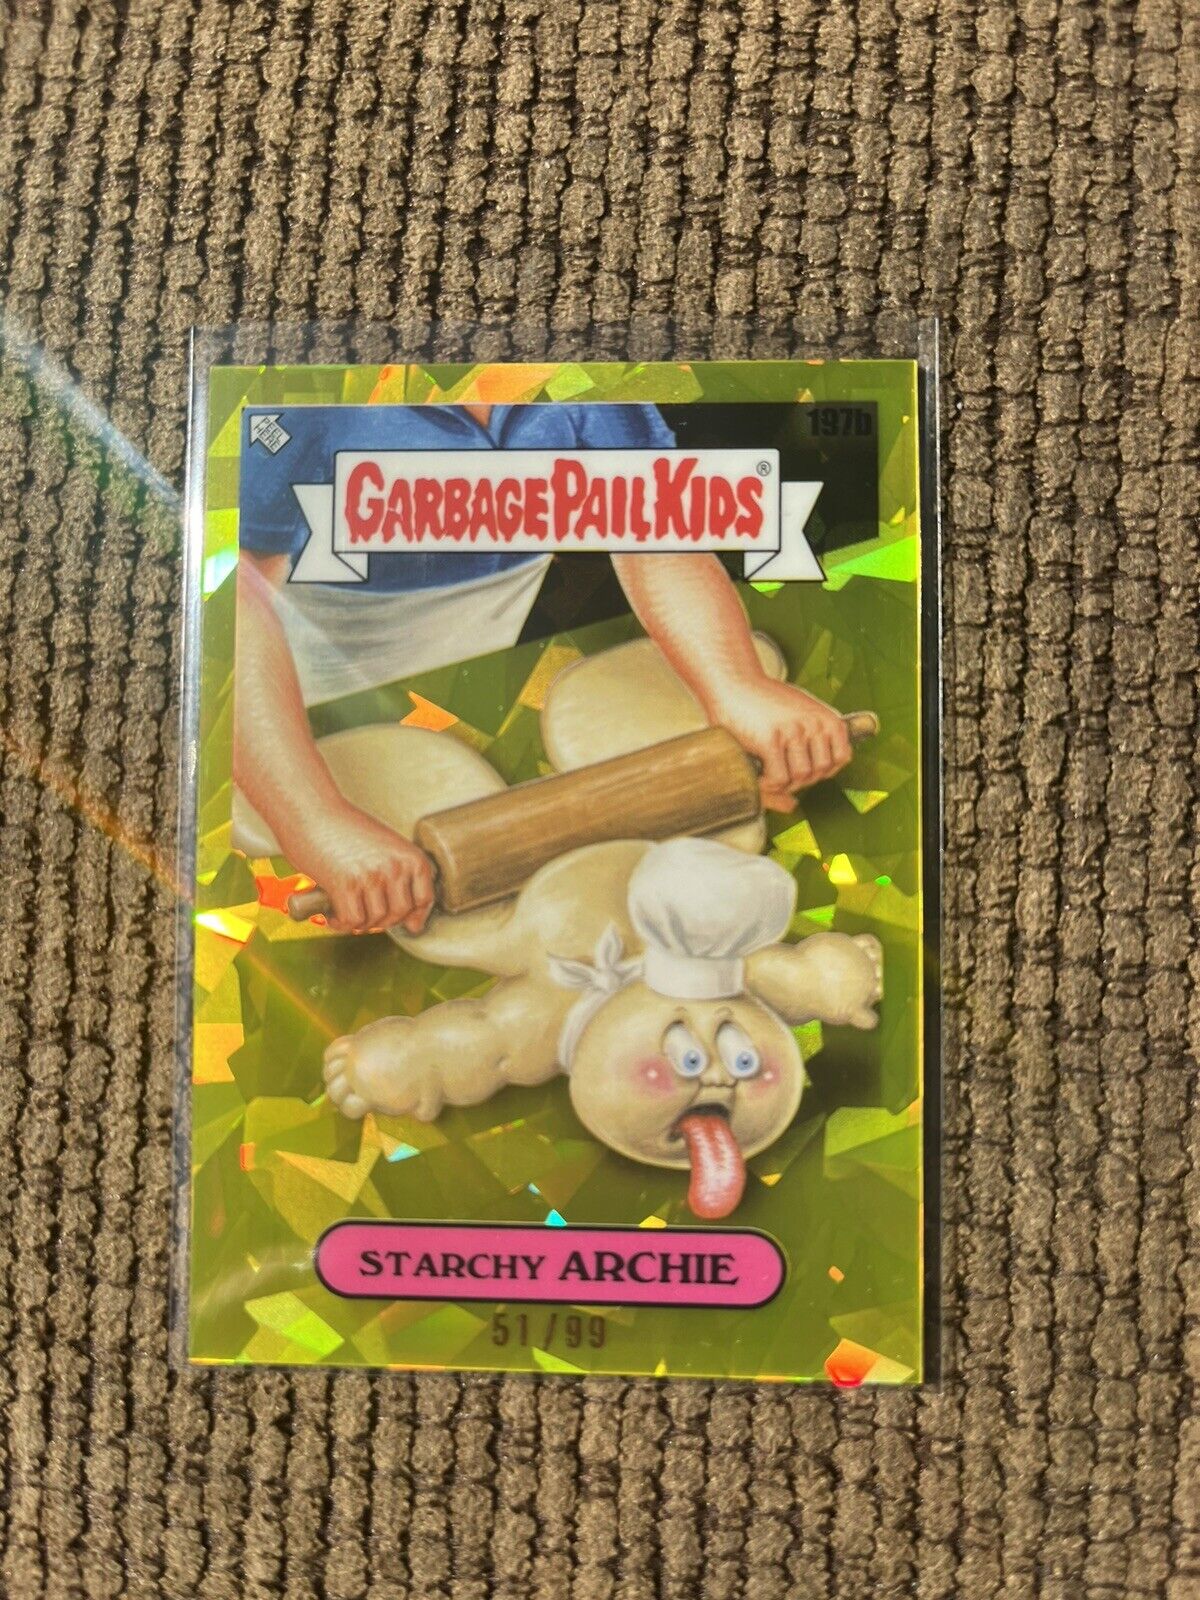 2022 Topps Chrome Sapphire Garbage Pail Kids Yellow 51/99 Starchy Archie #197b